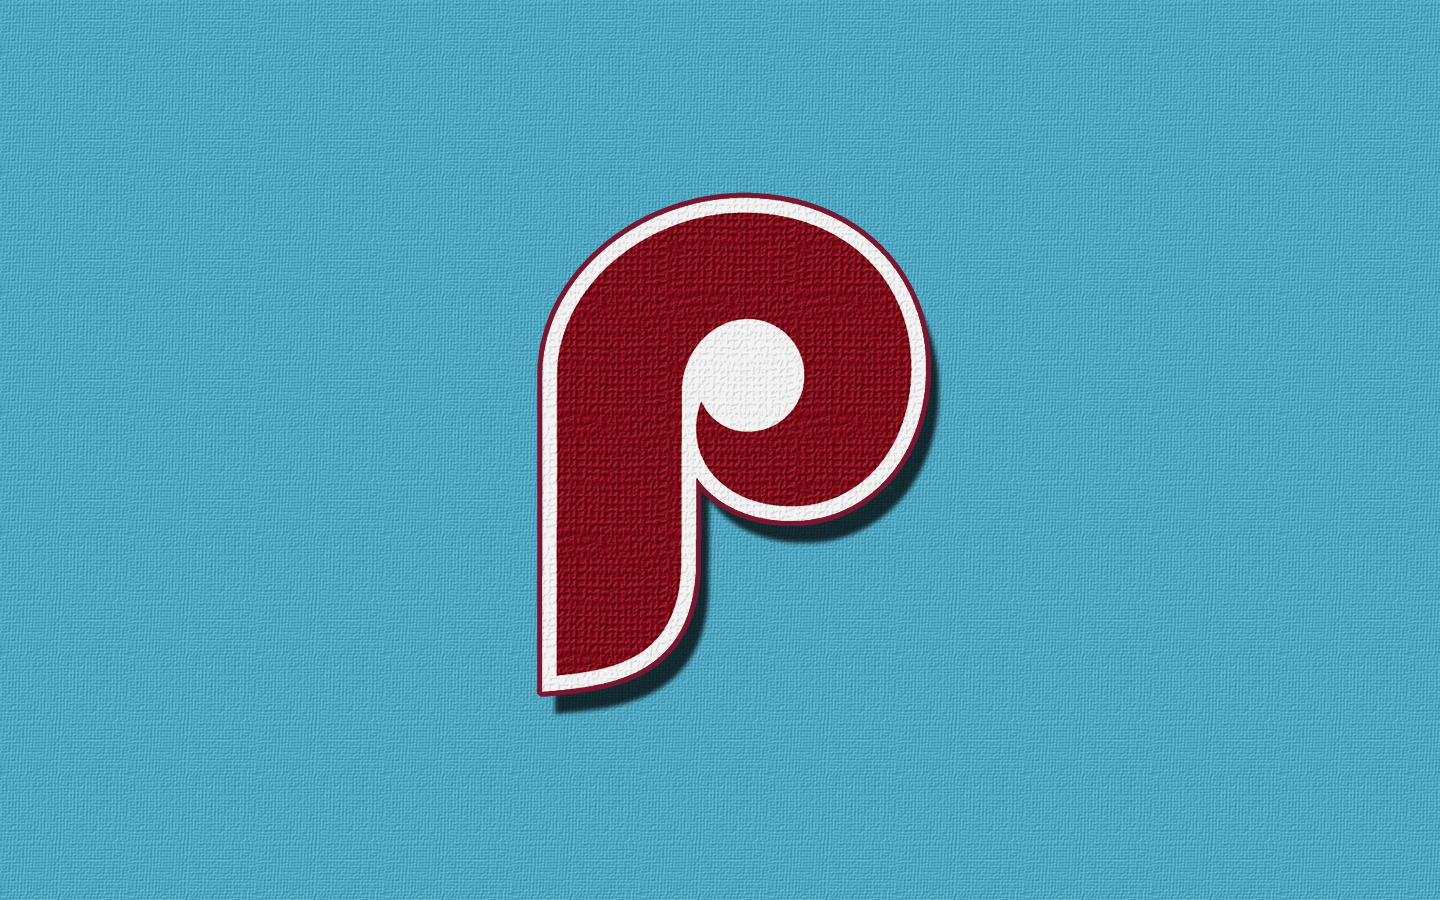 Phillies Wallpapers 73 images